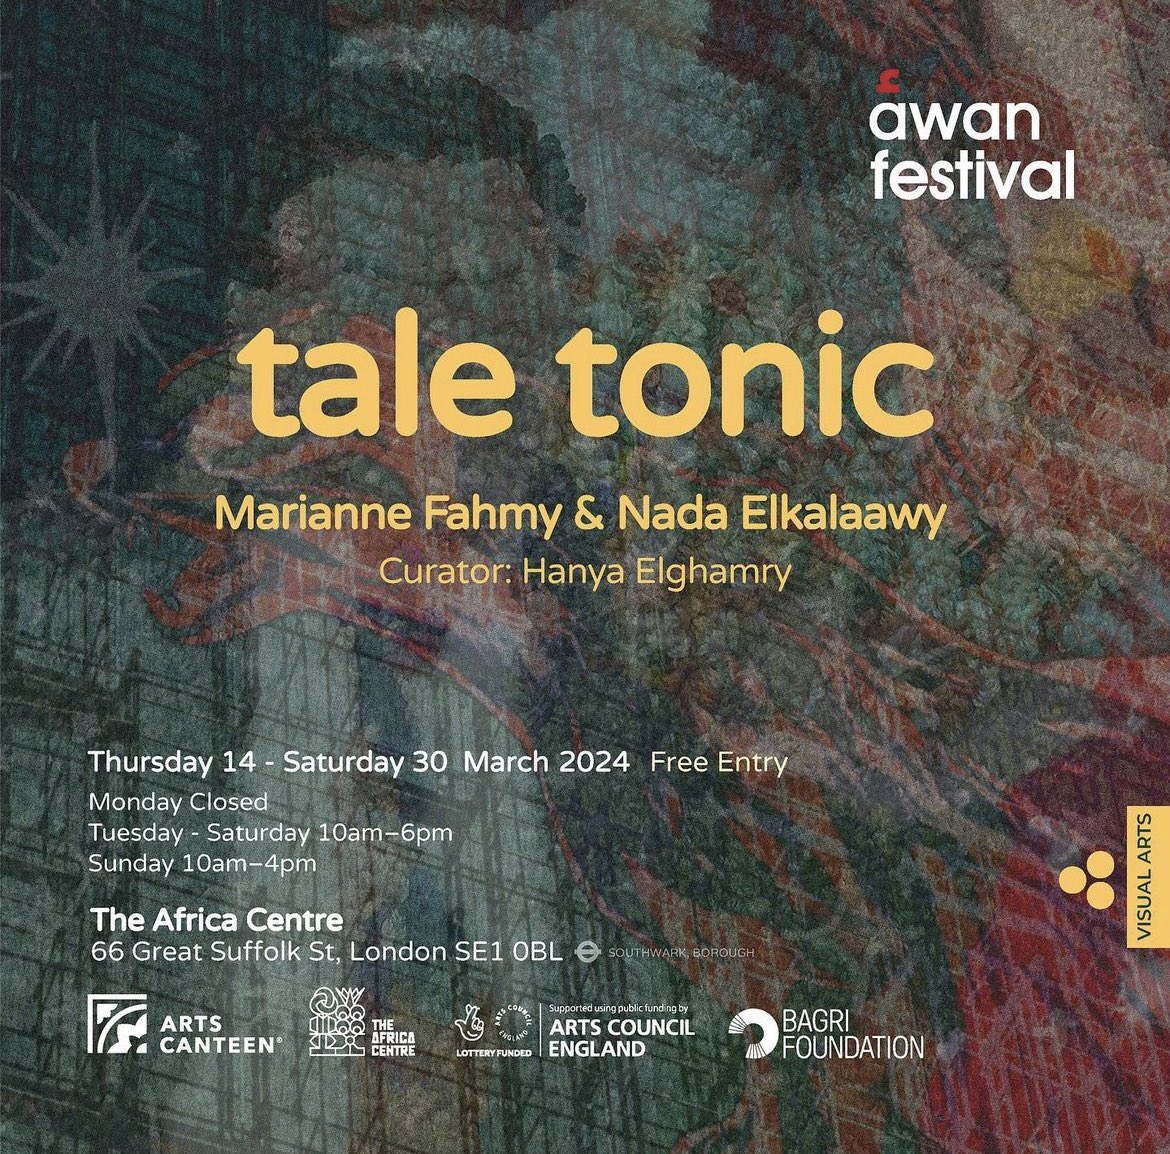 🔔Exhibition Alert! If you haven’t had a chance to do so, please make sure to visit our gallery for the Tale Tonic exhibition. Currently showing as part of the @AWANFESTIVAL until 30 March. Curated by Egyptian artist & curator Hanya Elghamry & features works of Egyptian artists.